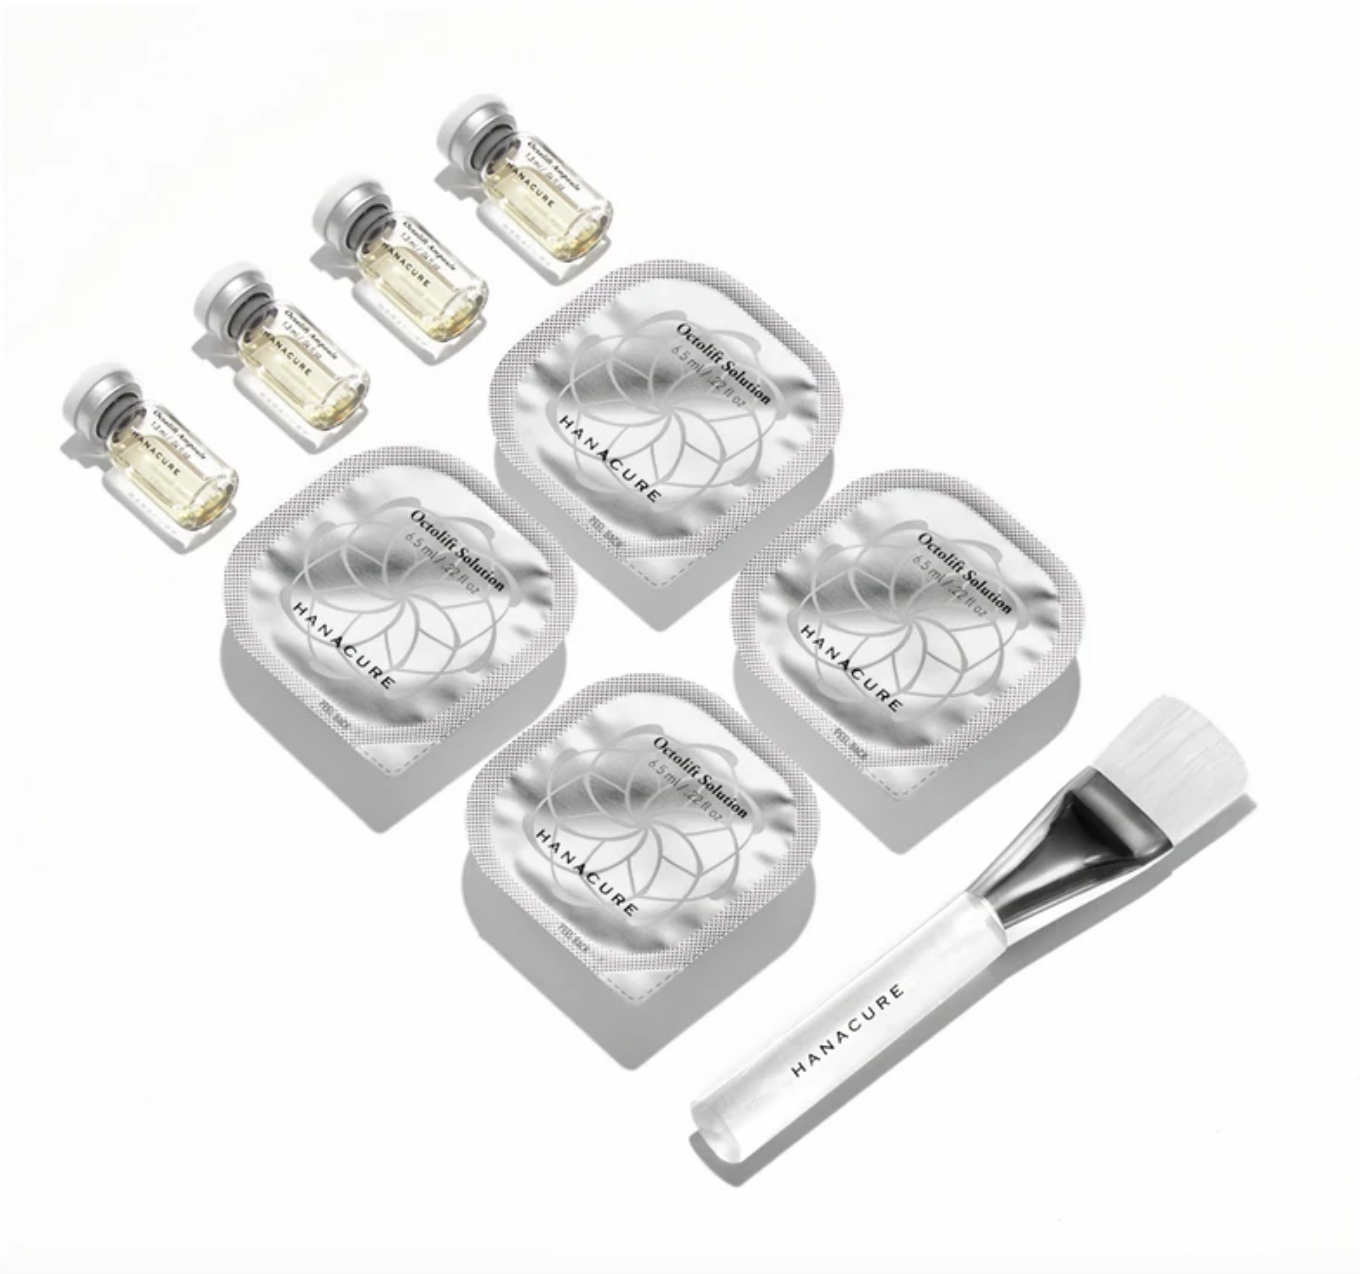 Hanacure All-In-One Facial Set